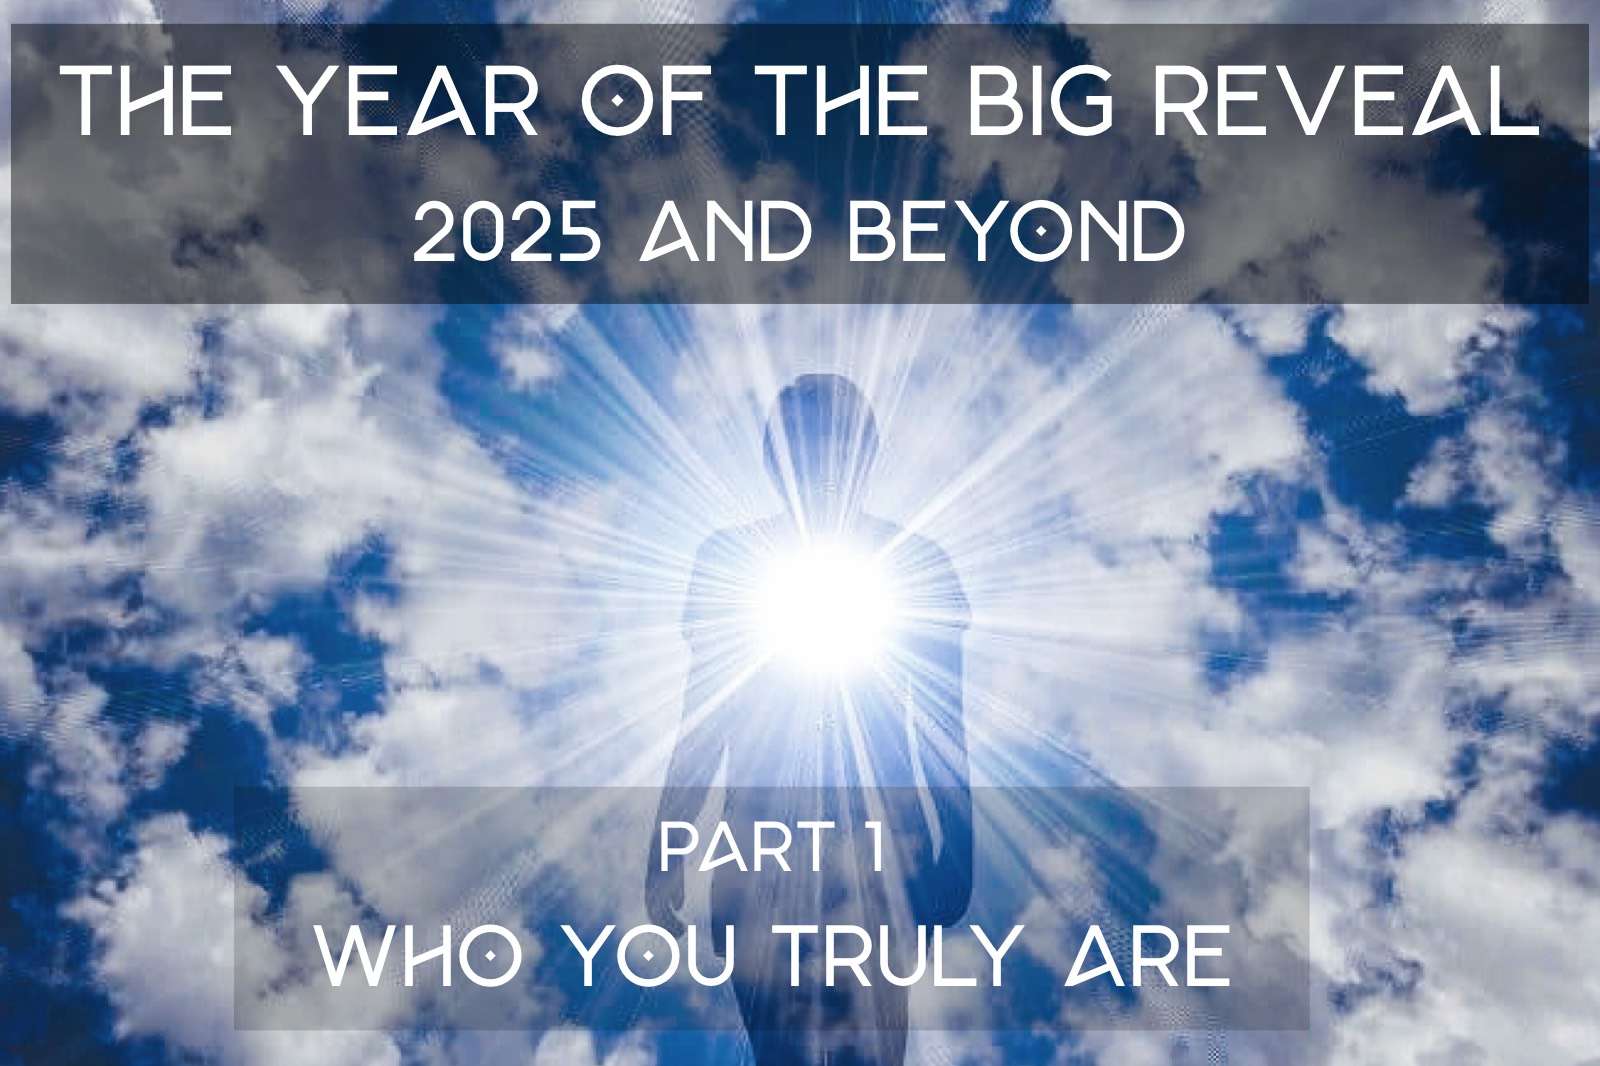 The year of the big reveal, 2025 and beyond!